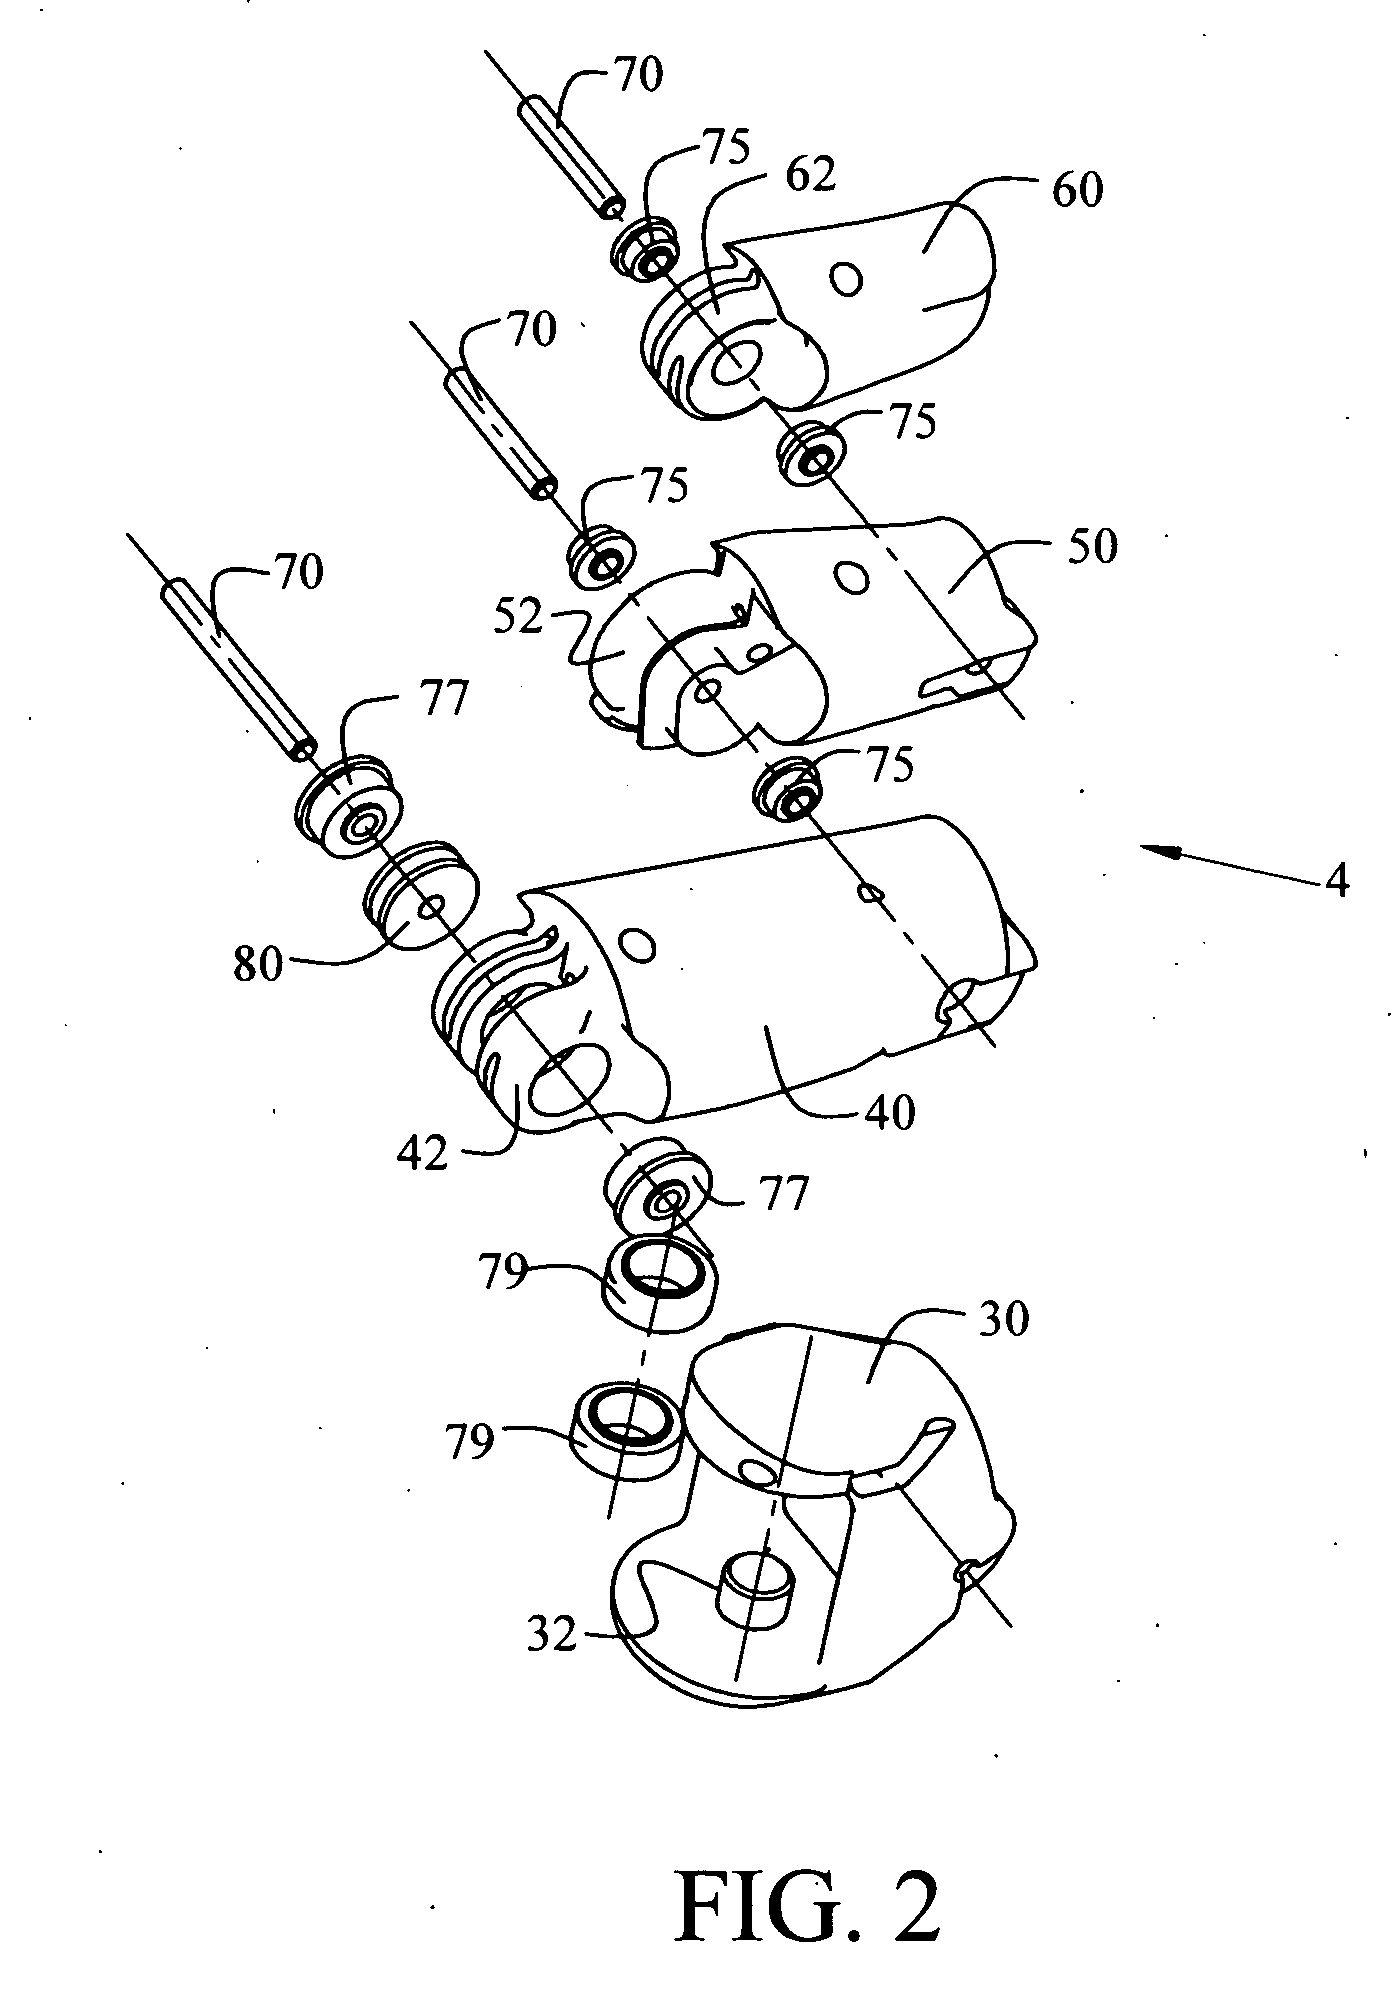 Robotic hand and arm apparatus